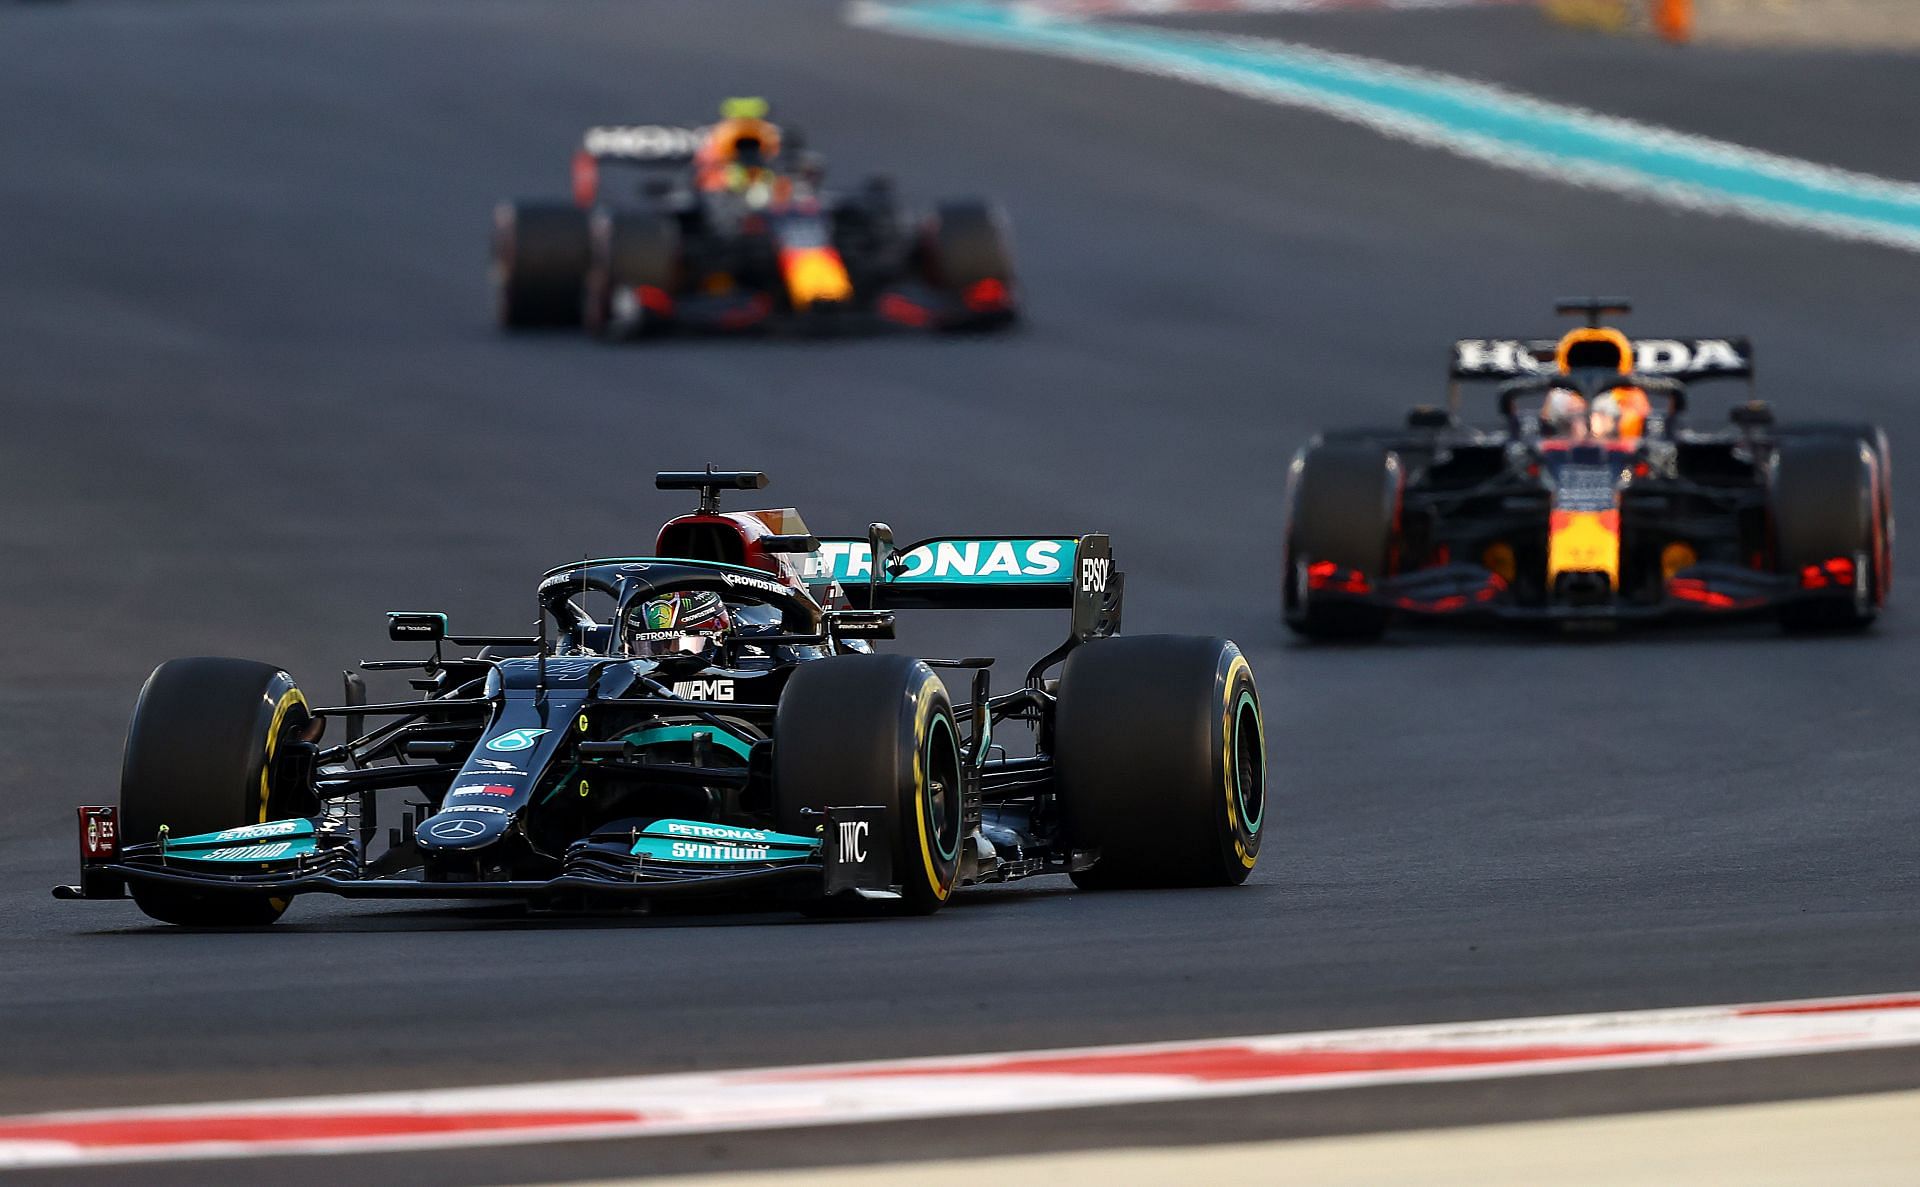 Lewis Hamilton (front) in action at the 2021 Abu Dhabi Grand Prix (Photo by Bryn Lennon/Getty Images)